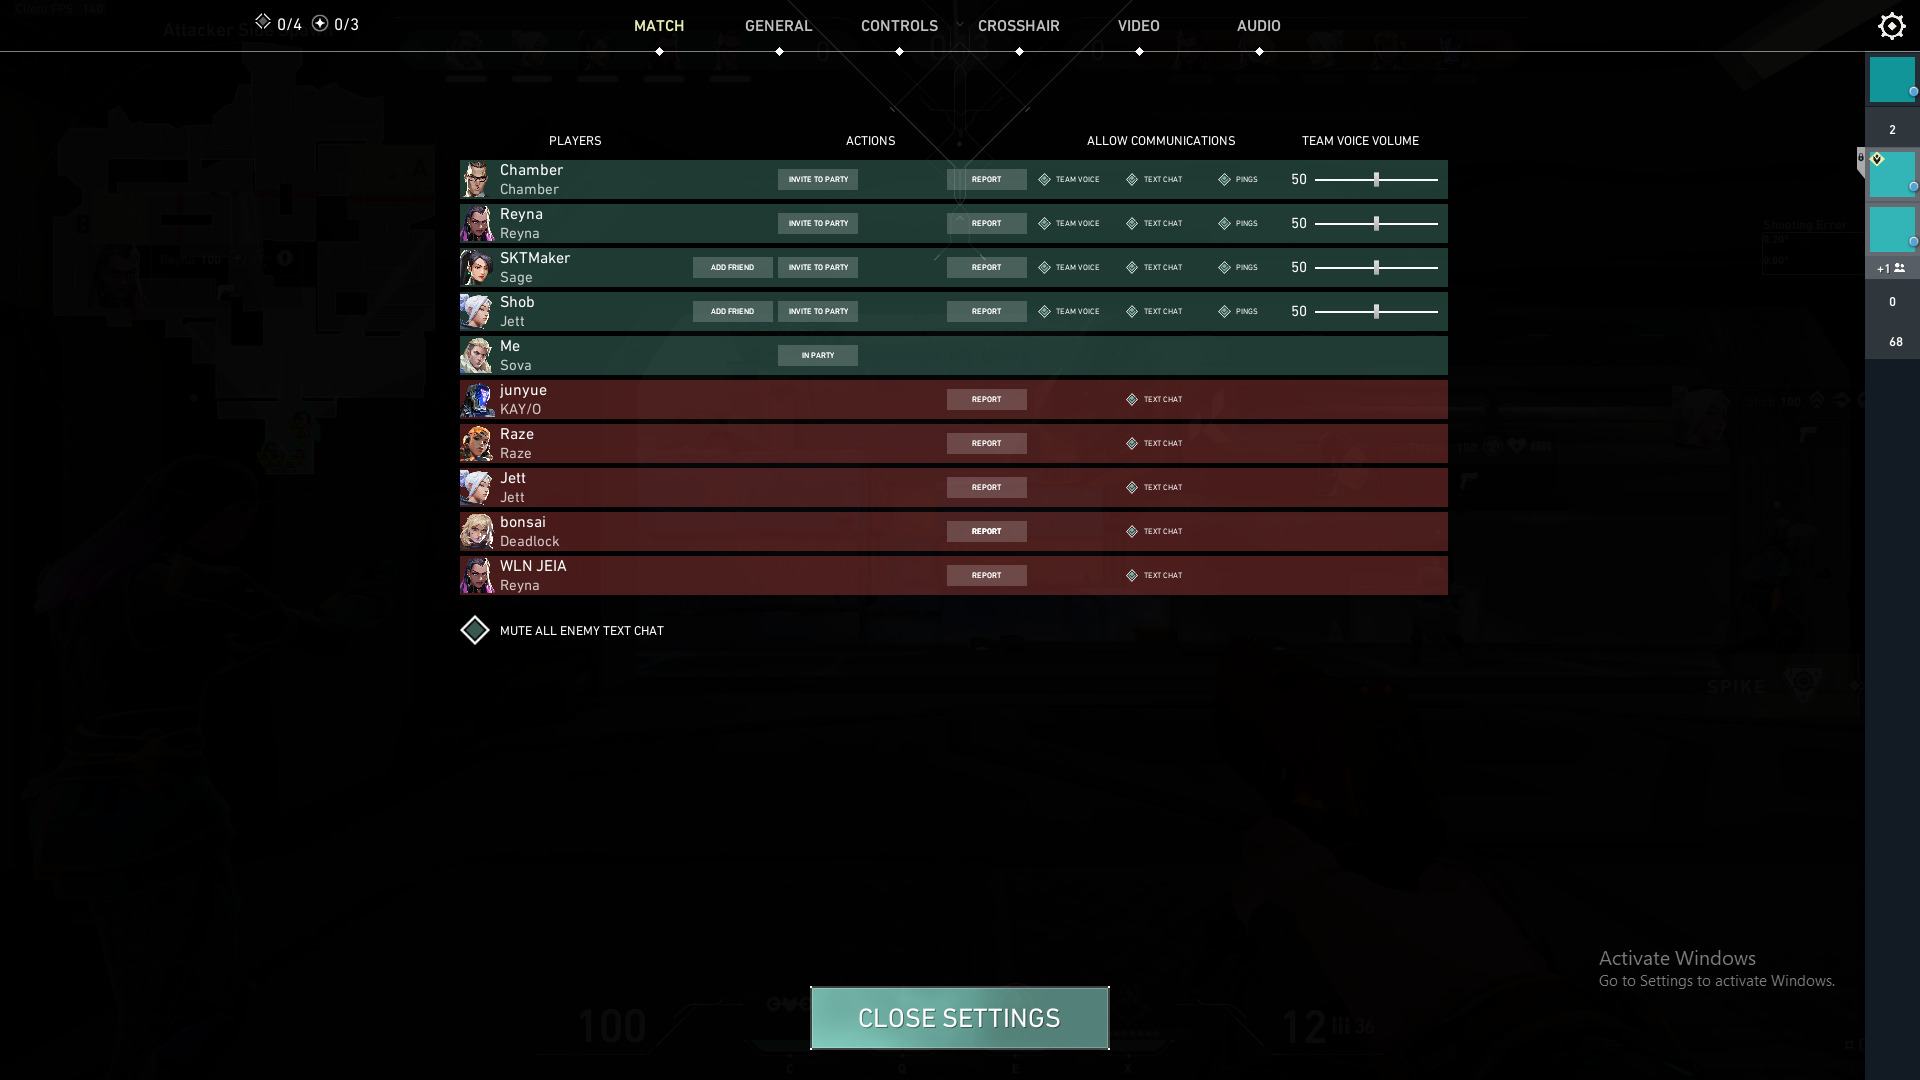 A screenshot showing the teammates screen in Valorant